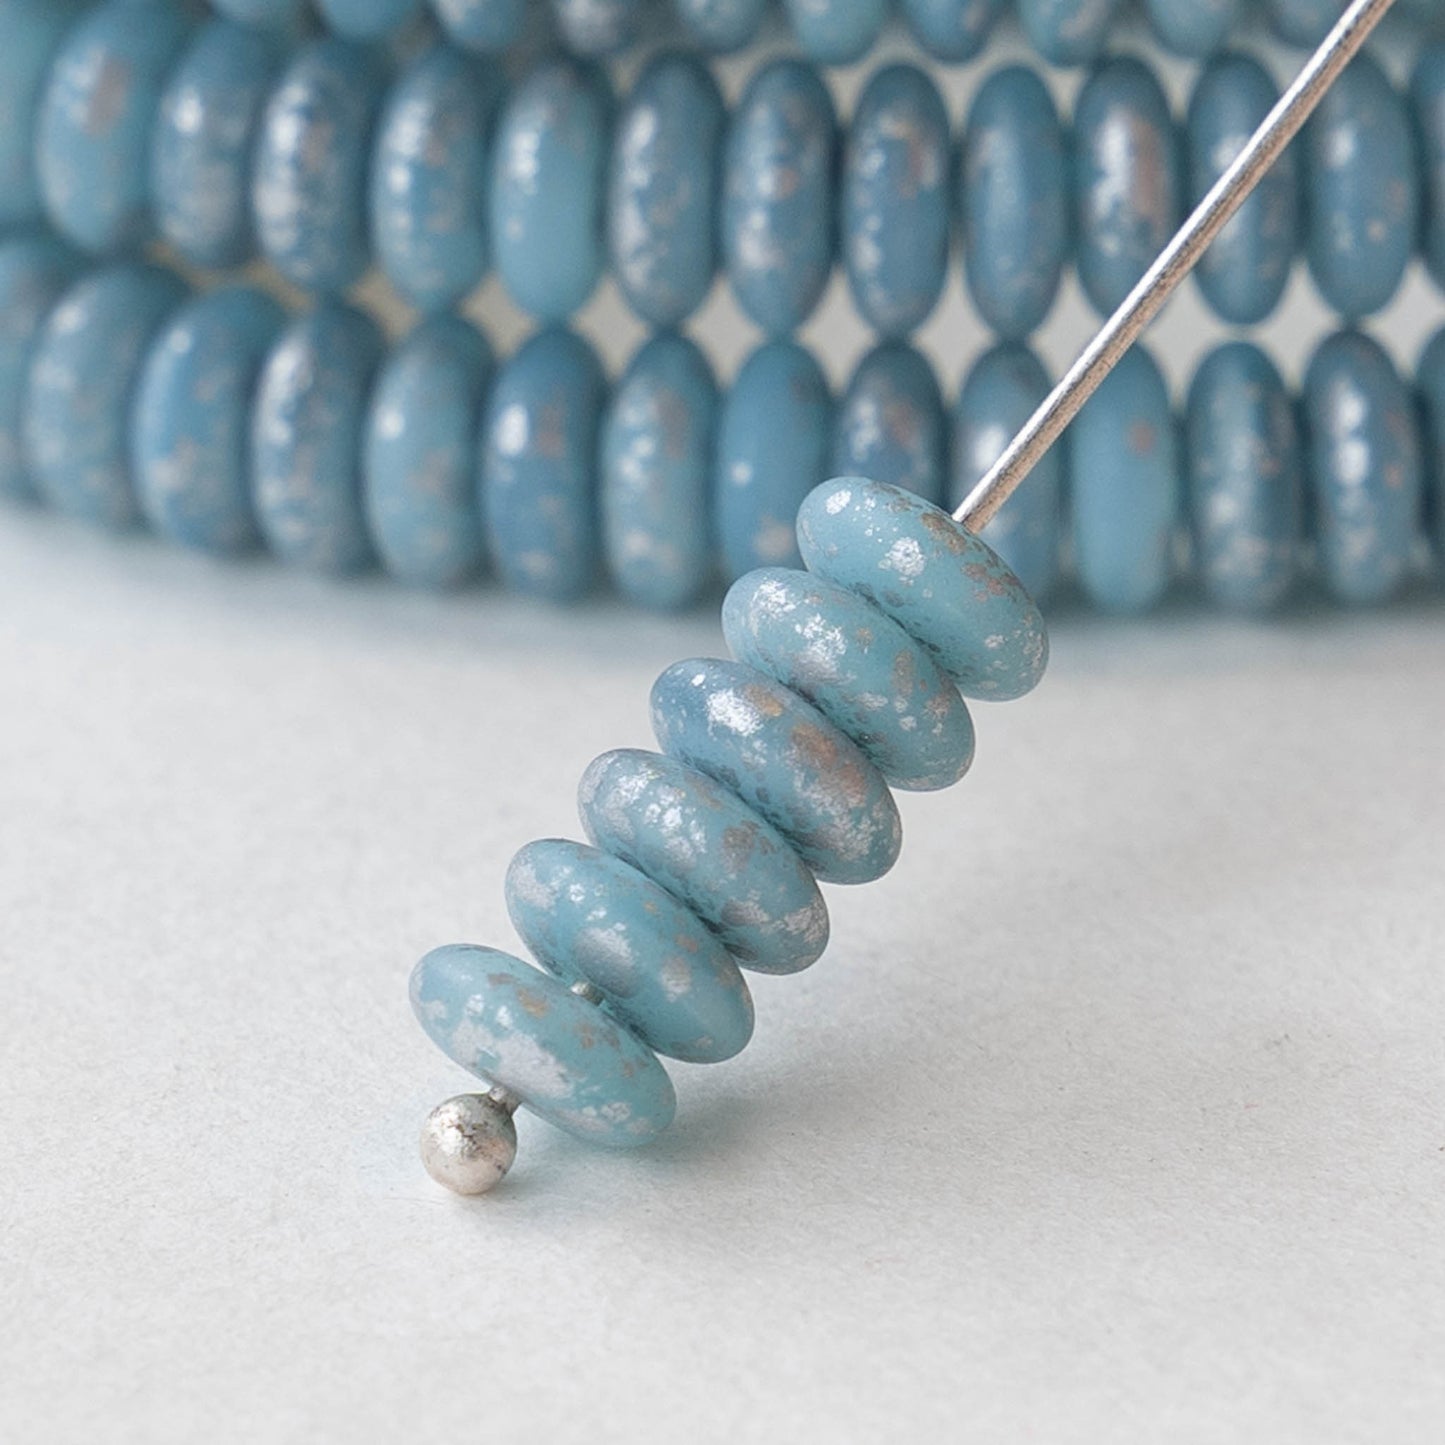 6mm Rondelle Beads - Blue Silk with Silver Dust - 50 Beads